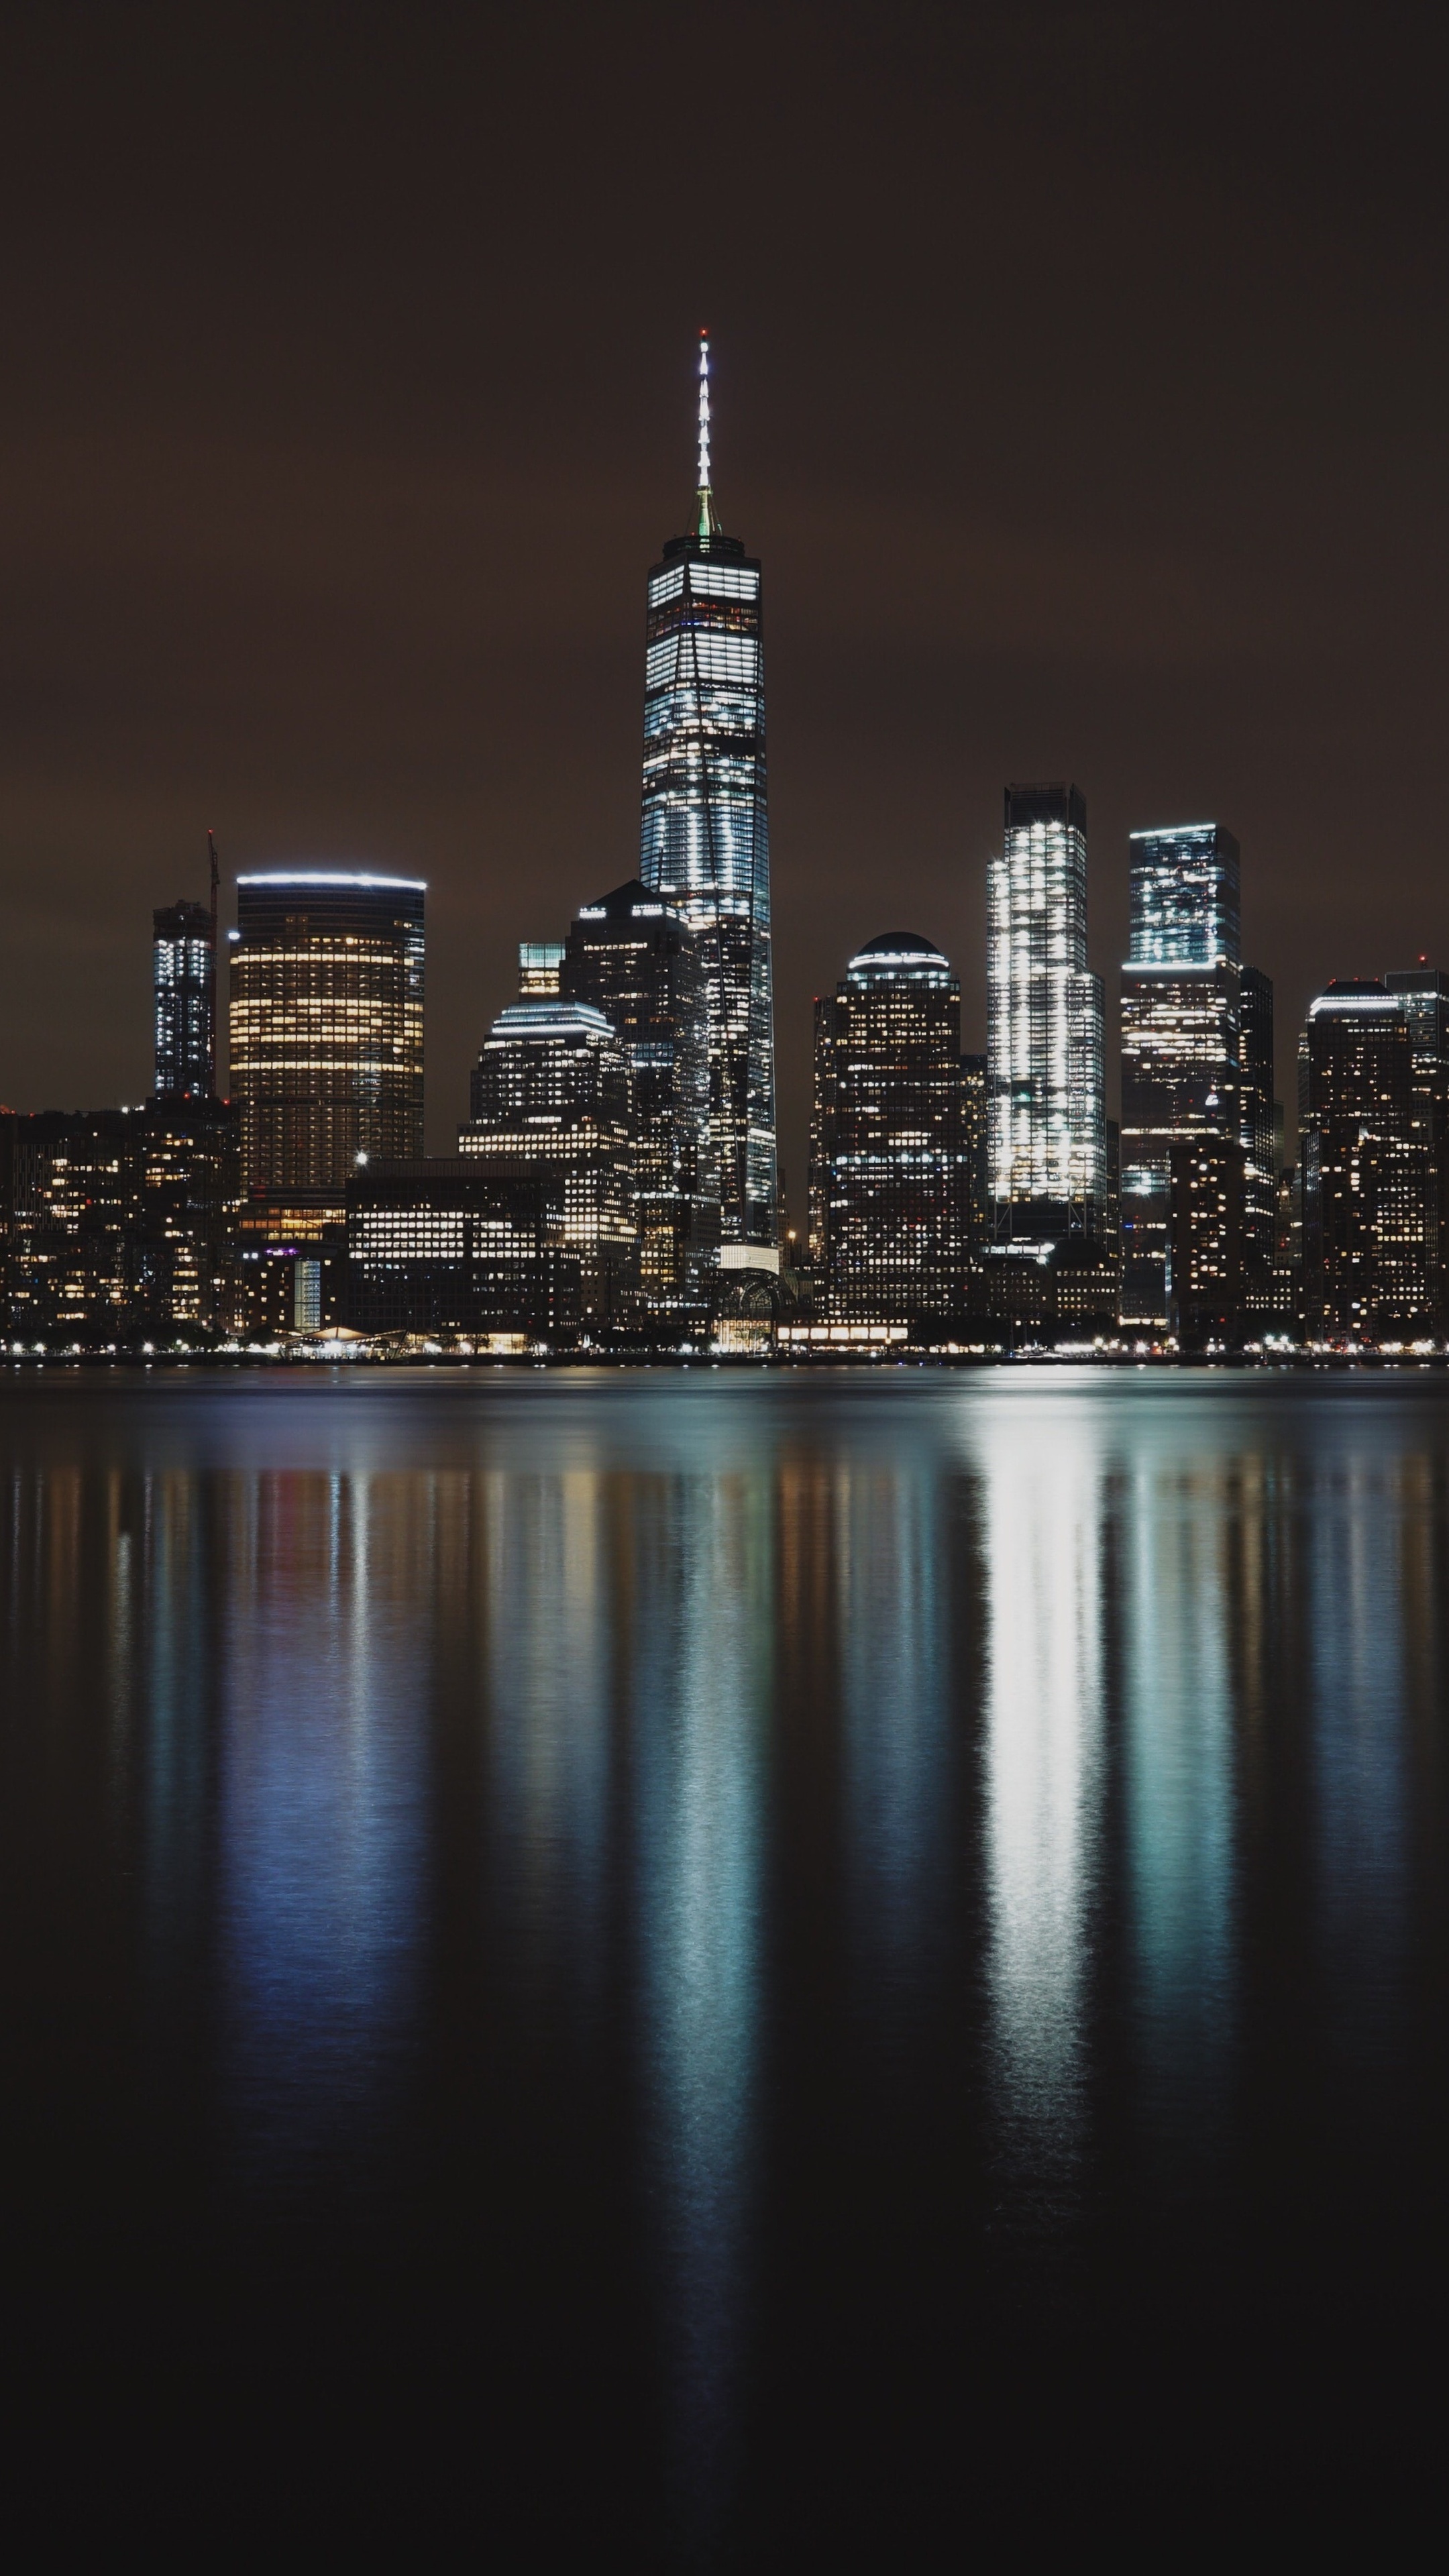 New York at Night, Sony Xperia wallpapers, Night images, 2160x3840 4K Handy